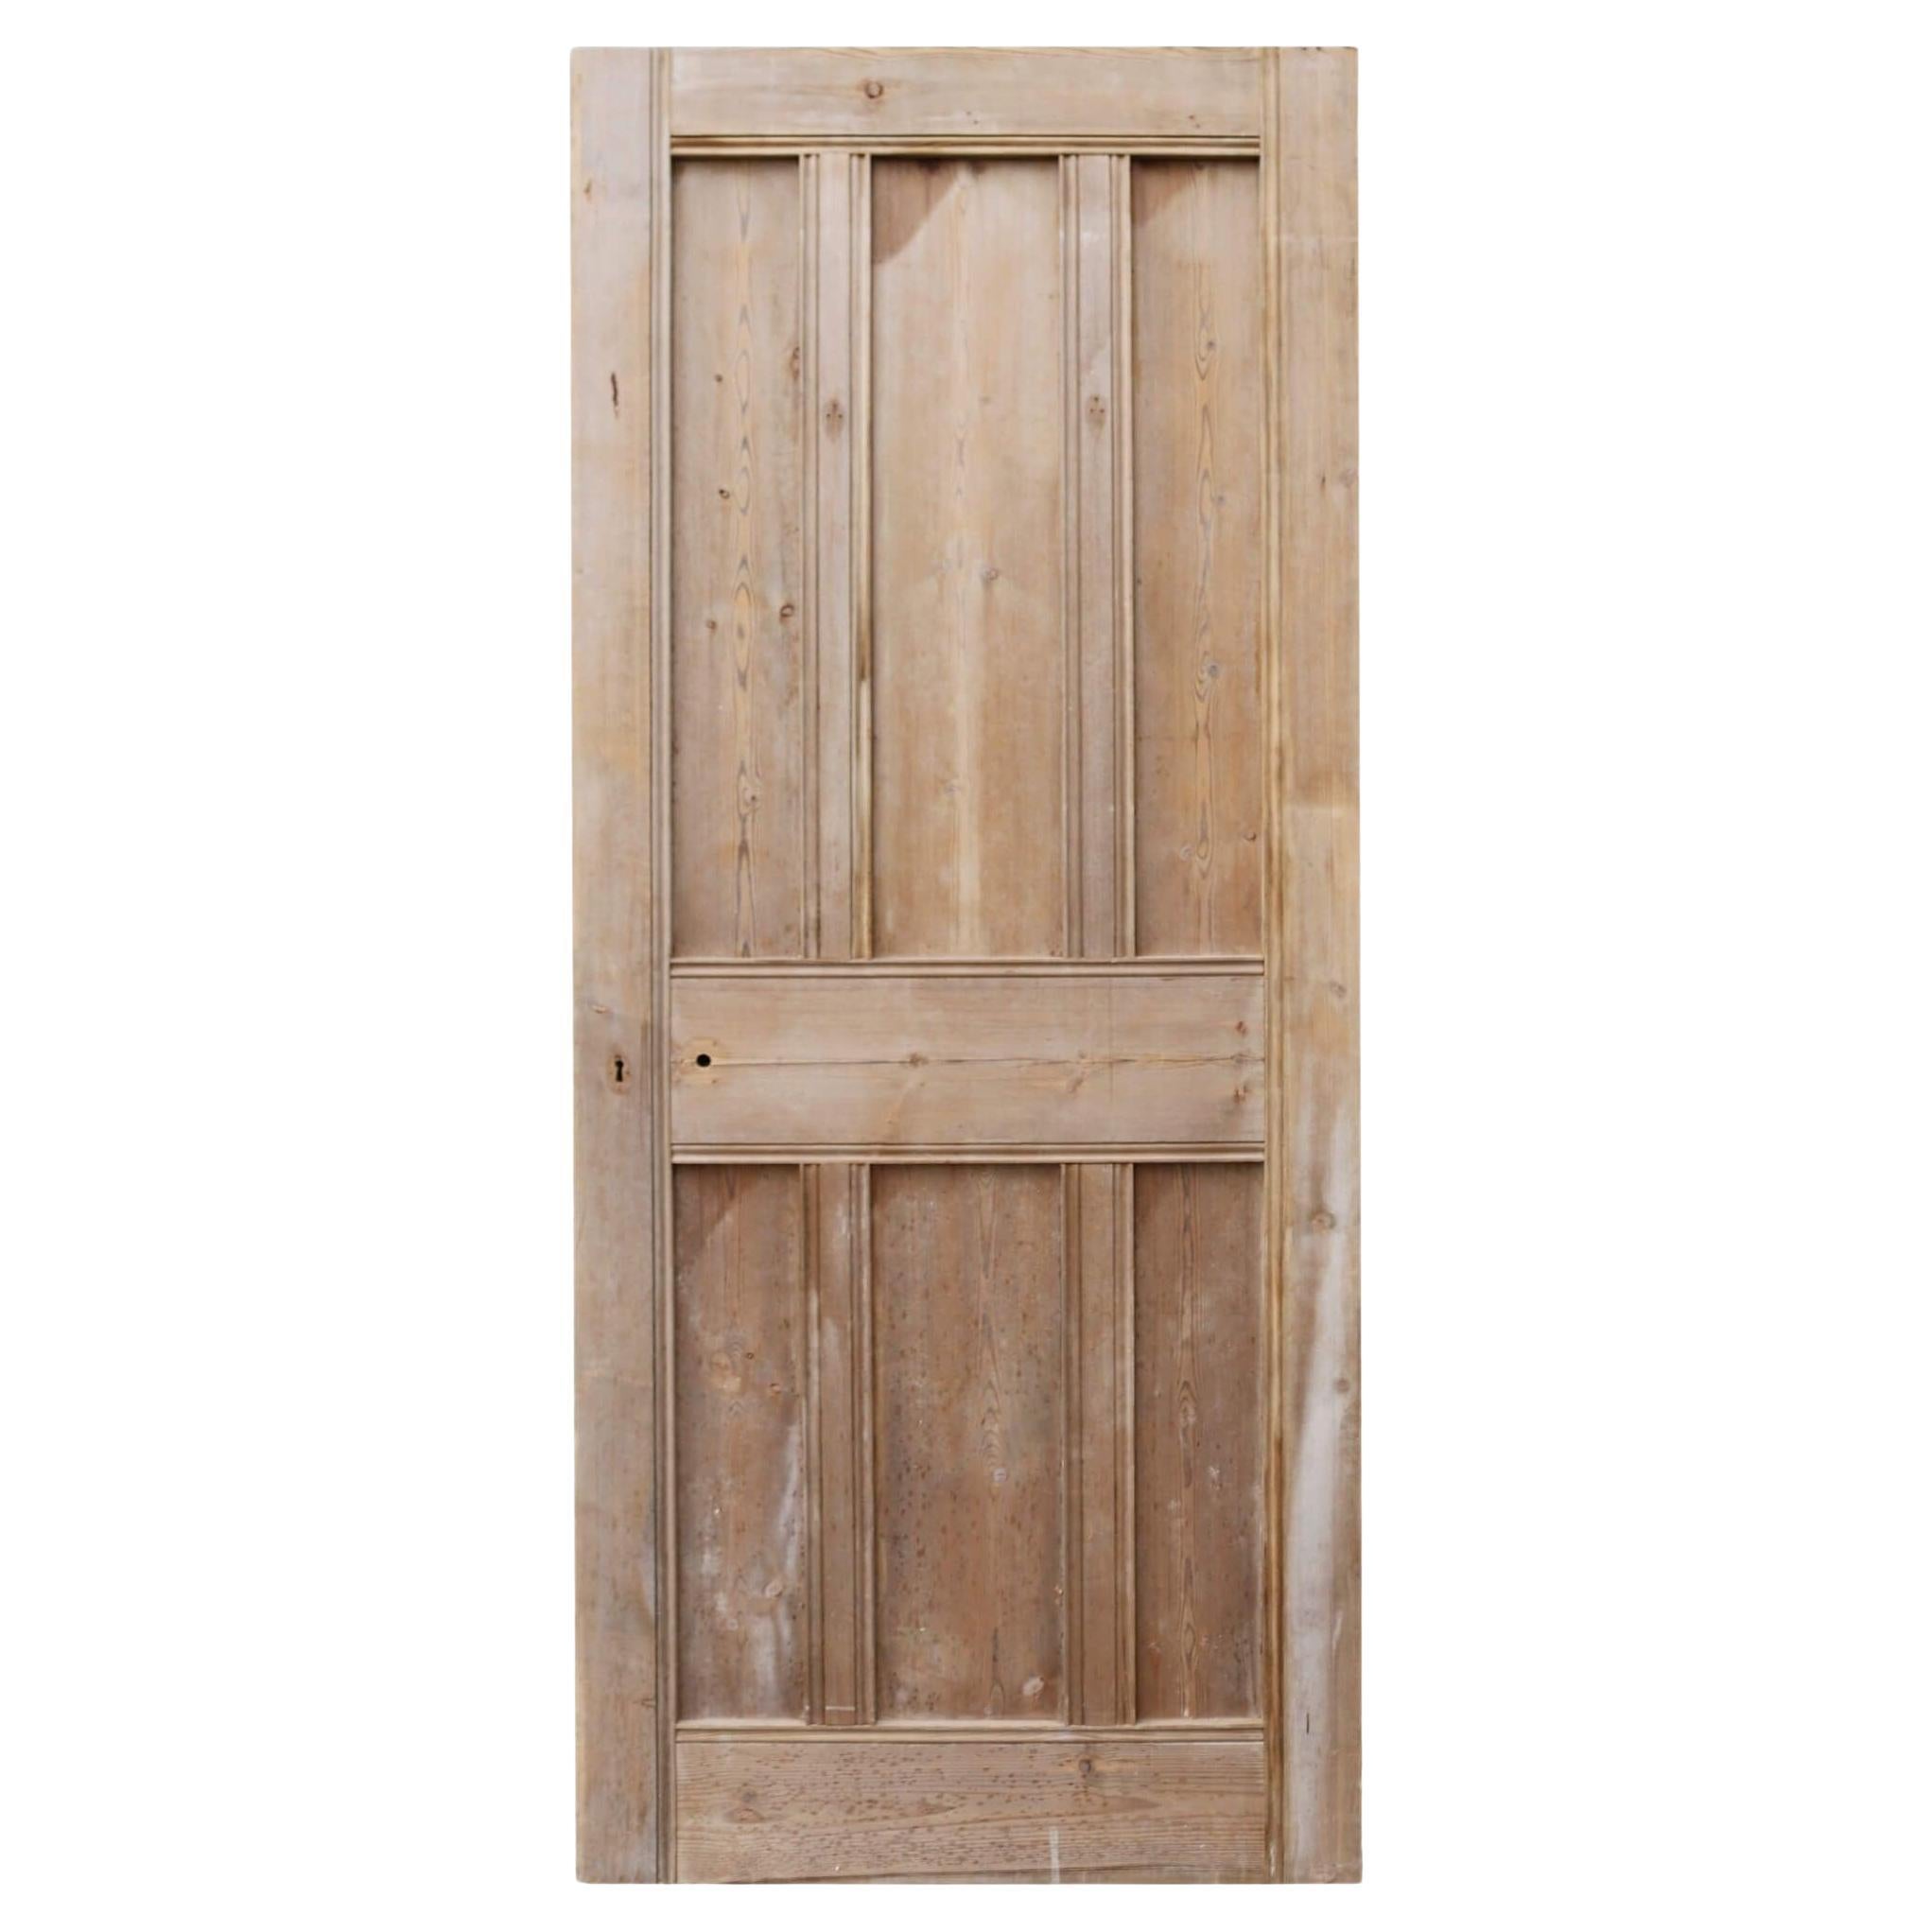 Arts & Crafts Stripped Pine Internal Doors (6 Available) For Sale